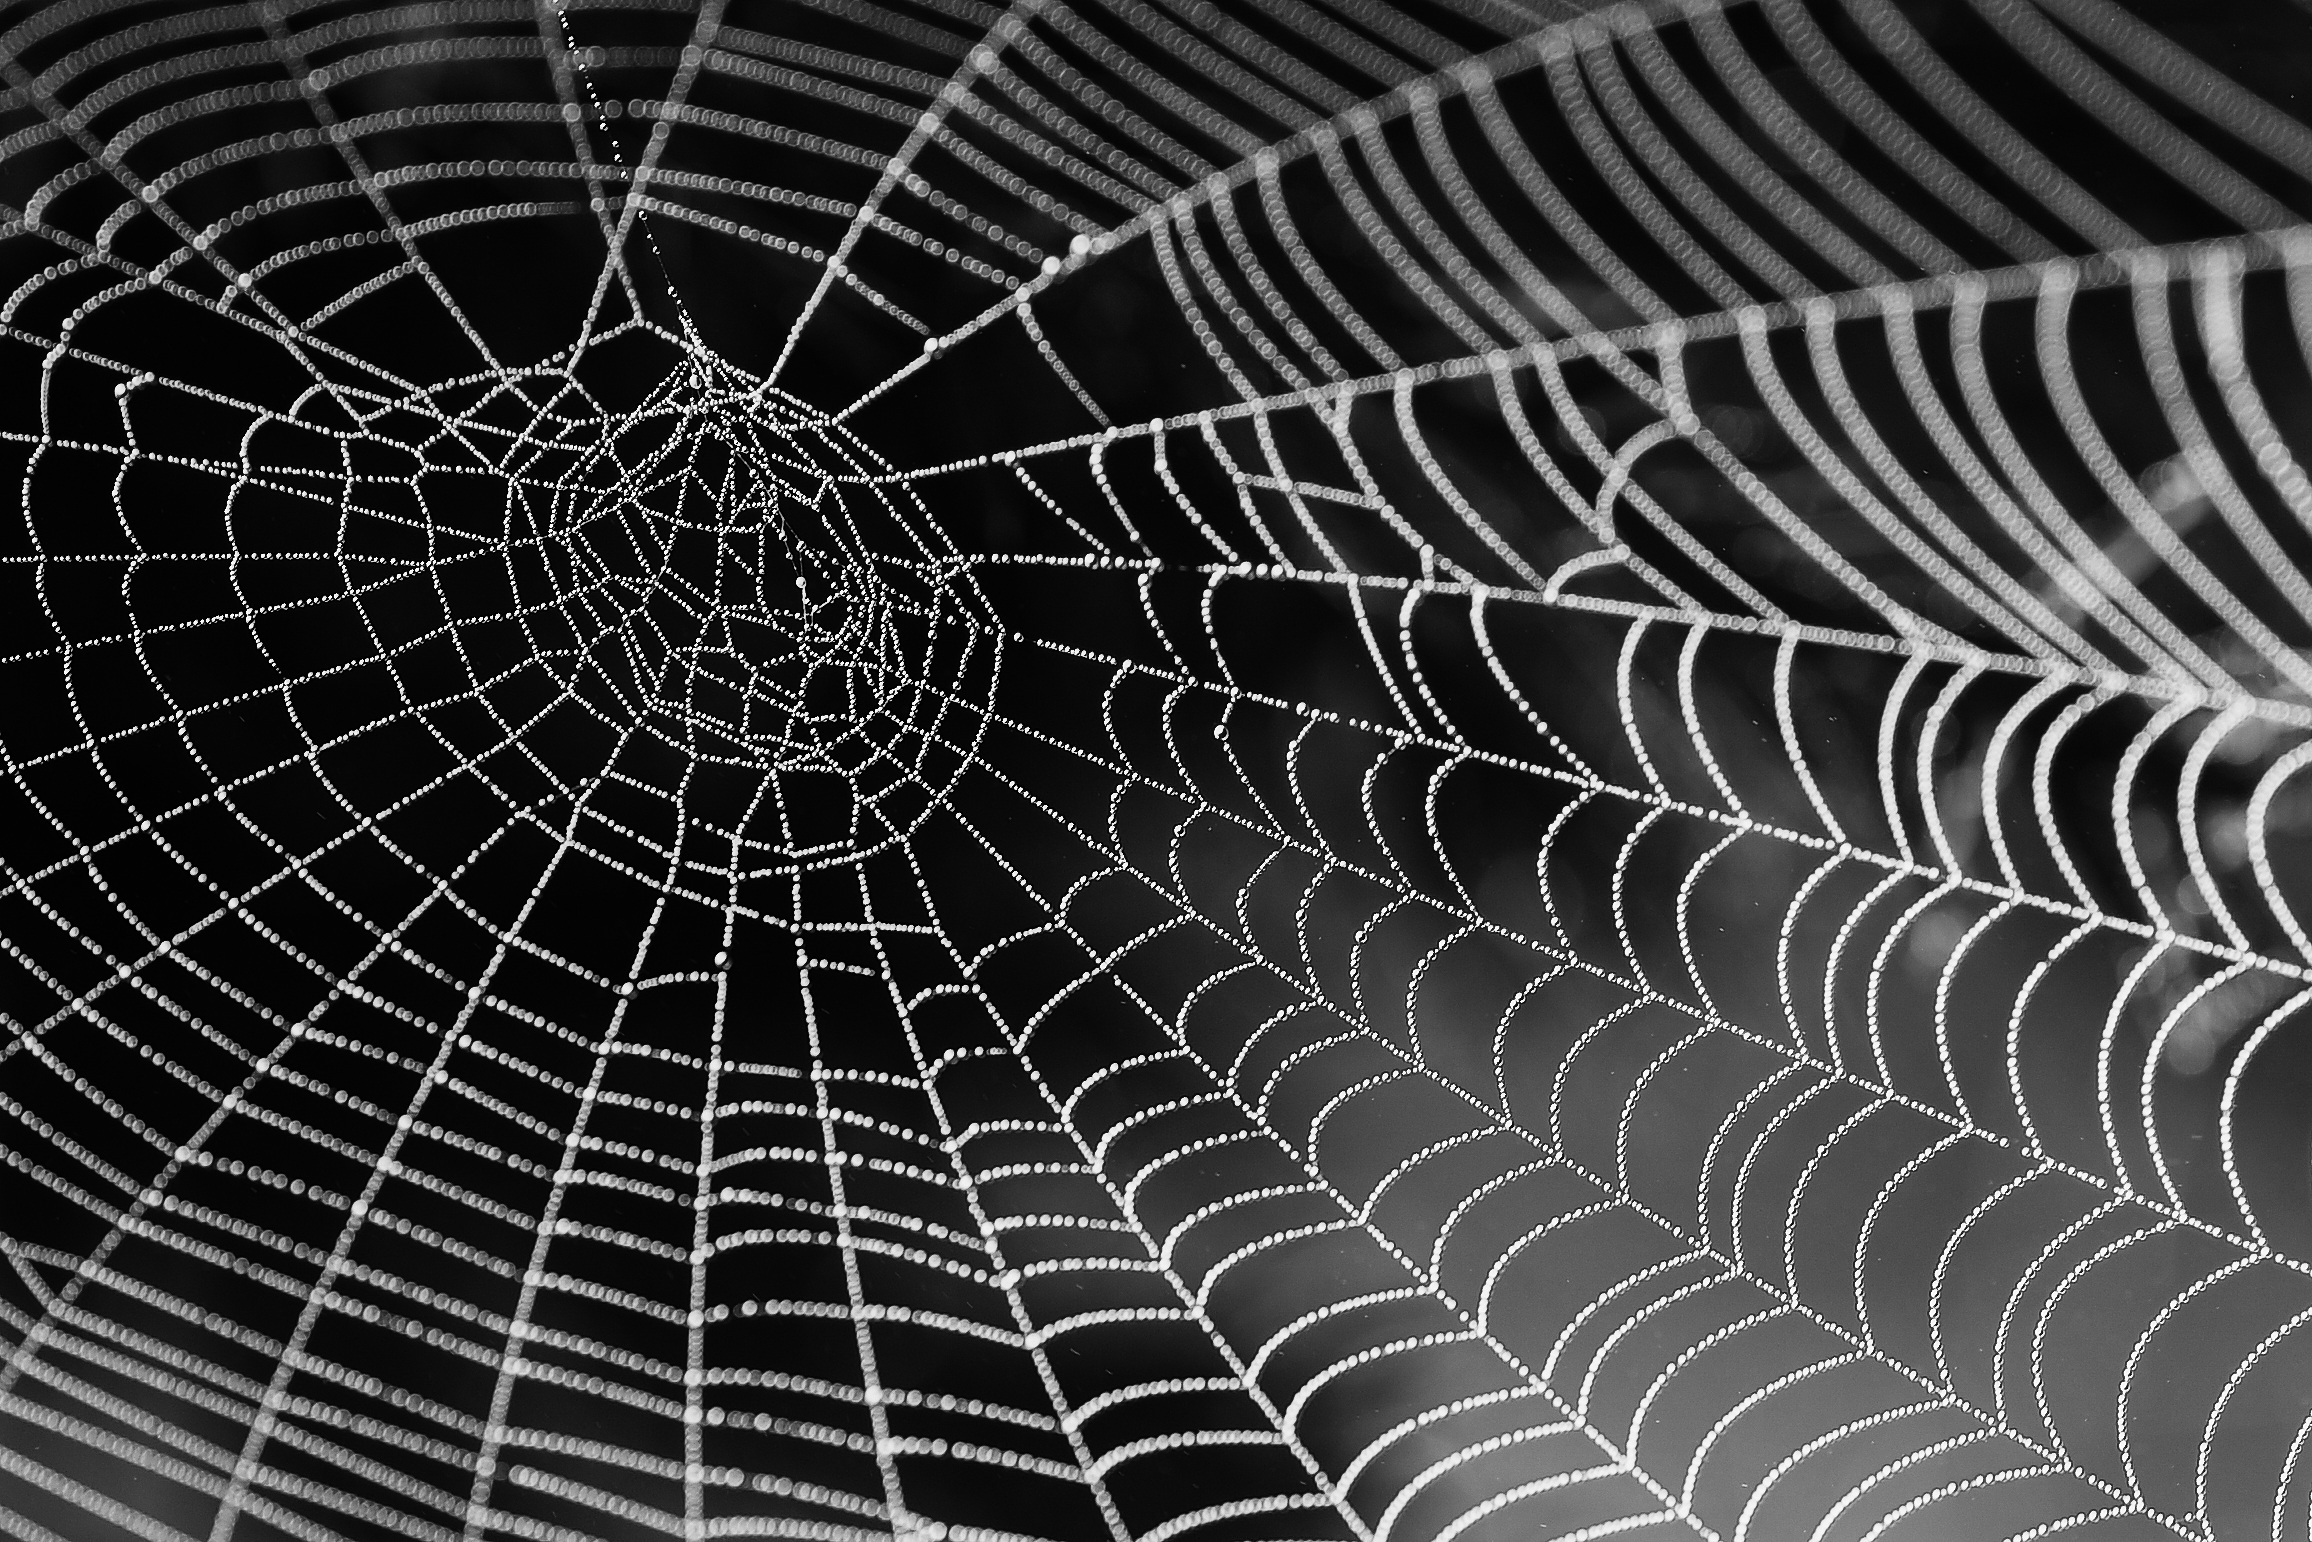 The Engineering Marvels of a Spider's Web - NES Global Talent